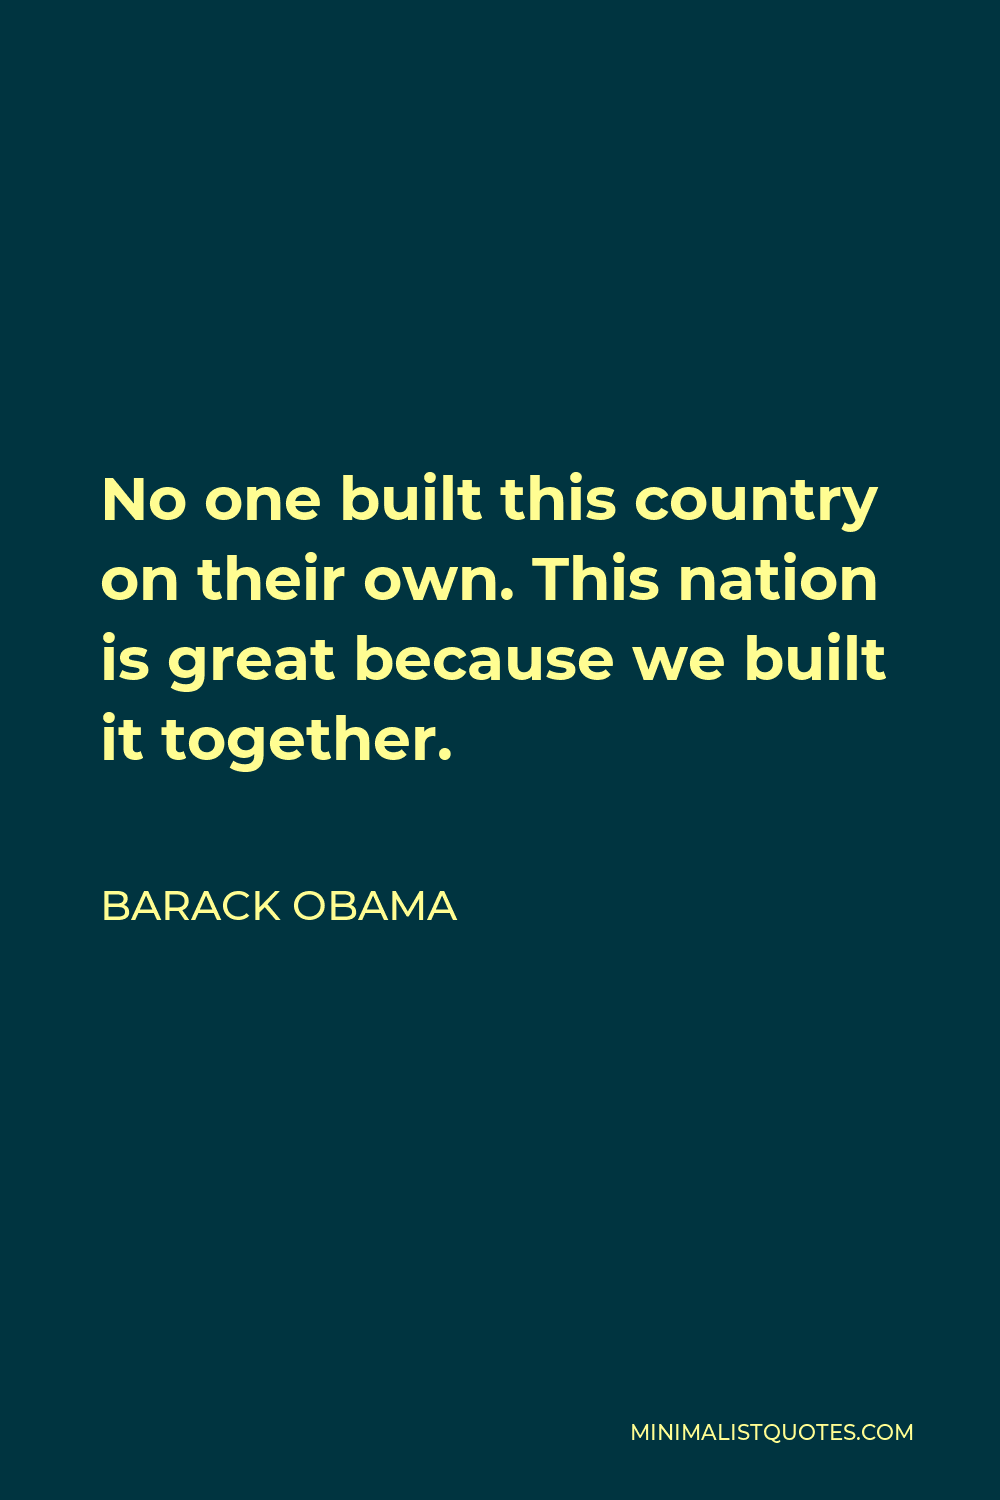 Barack Obama Quote - No one built this country on their own. This nation is great because we built it together.